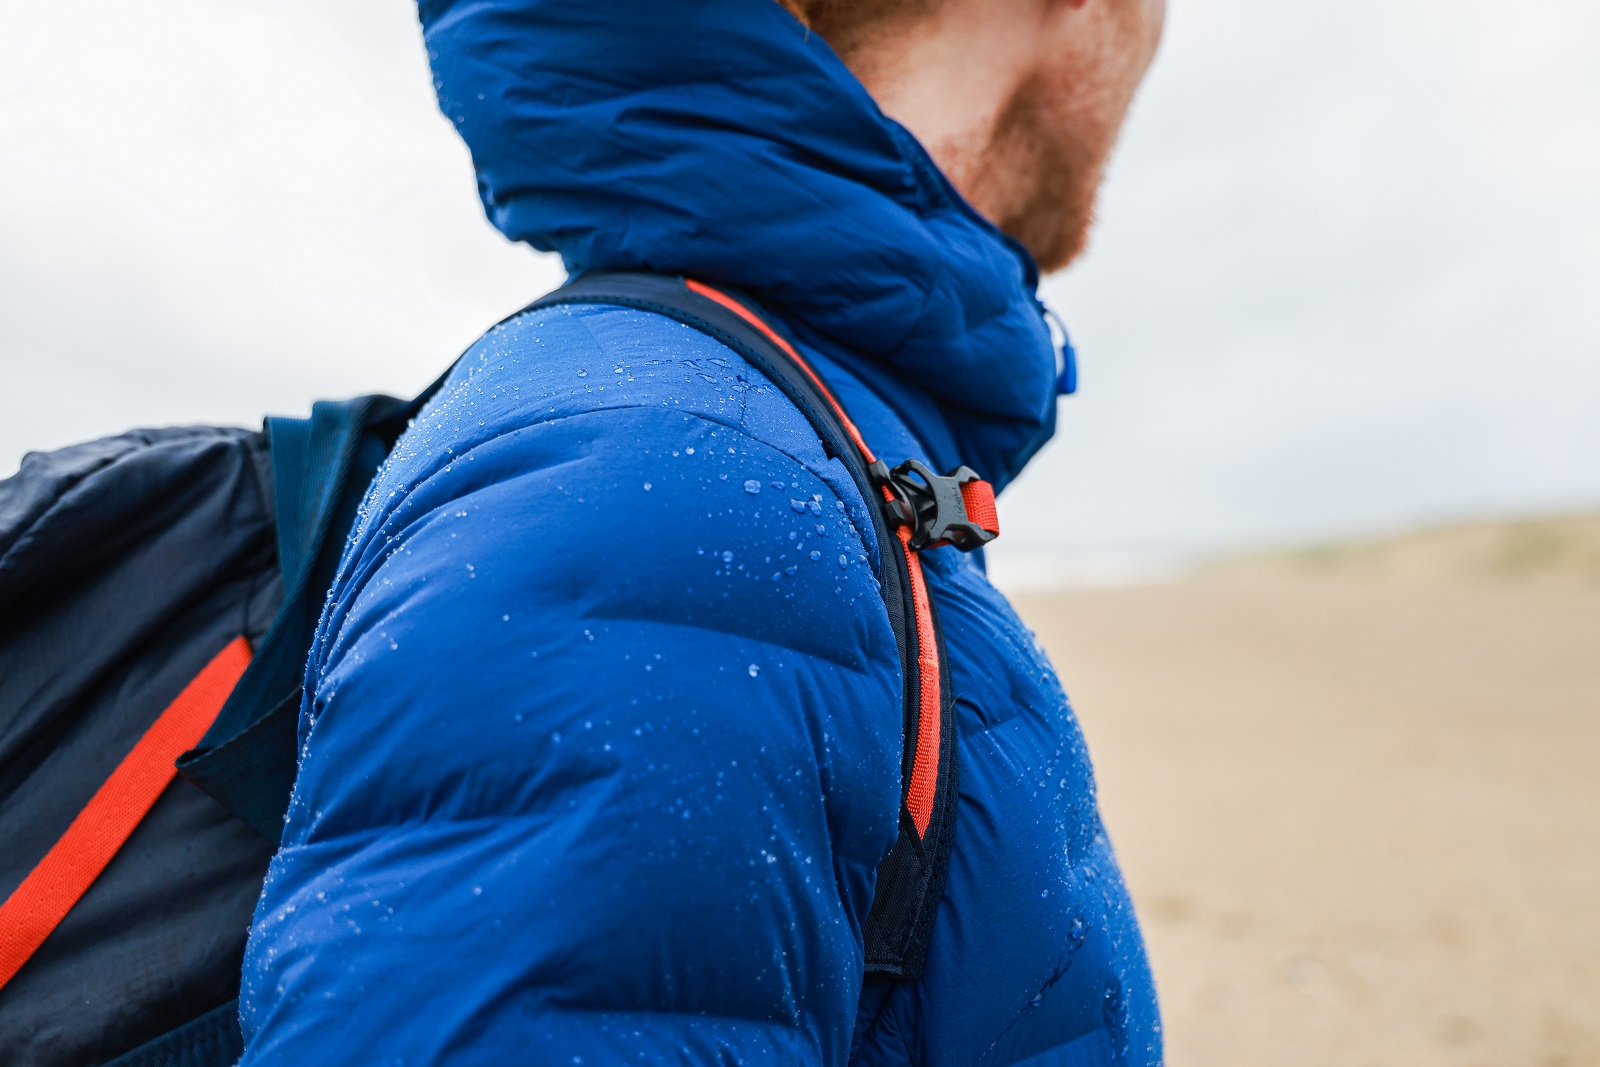 Welcome to the Nikwax blog How to clean and waterproof your winter jacket -  Welcome to the Nikwax blog